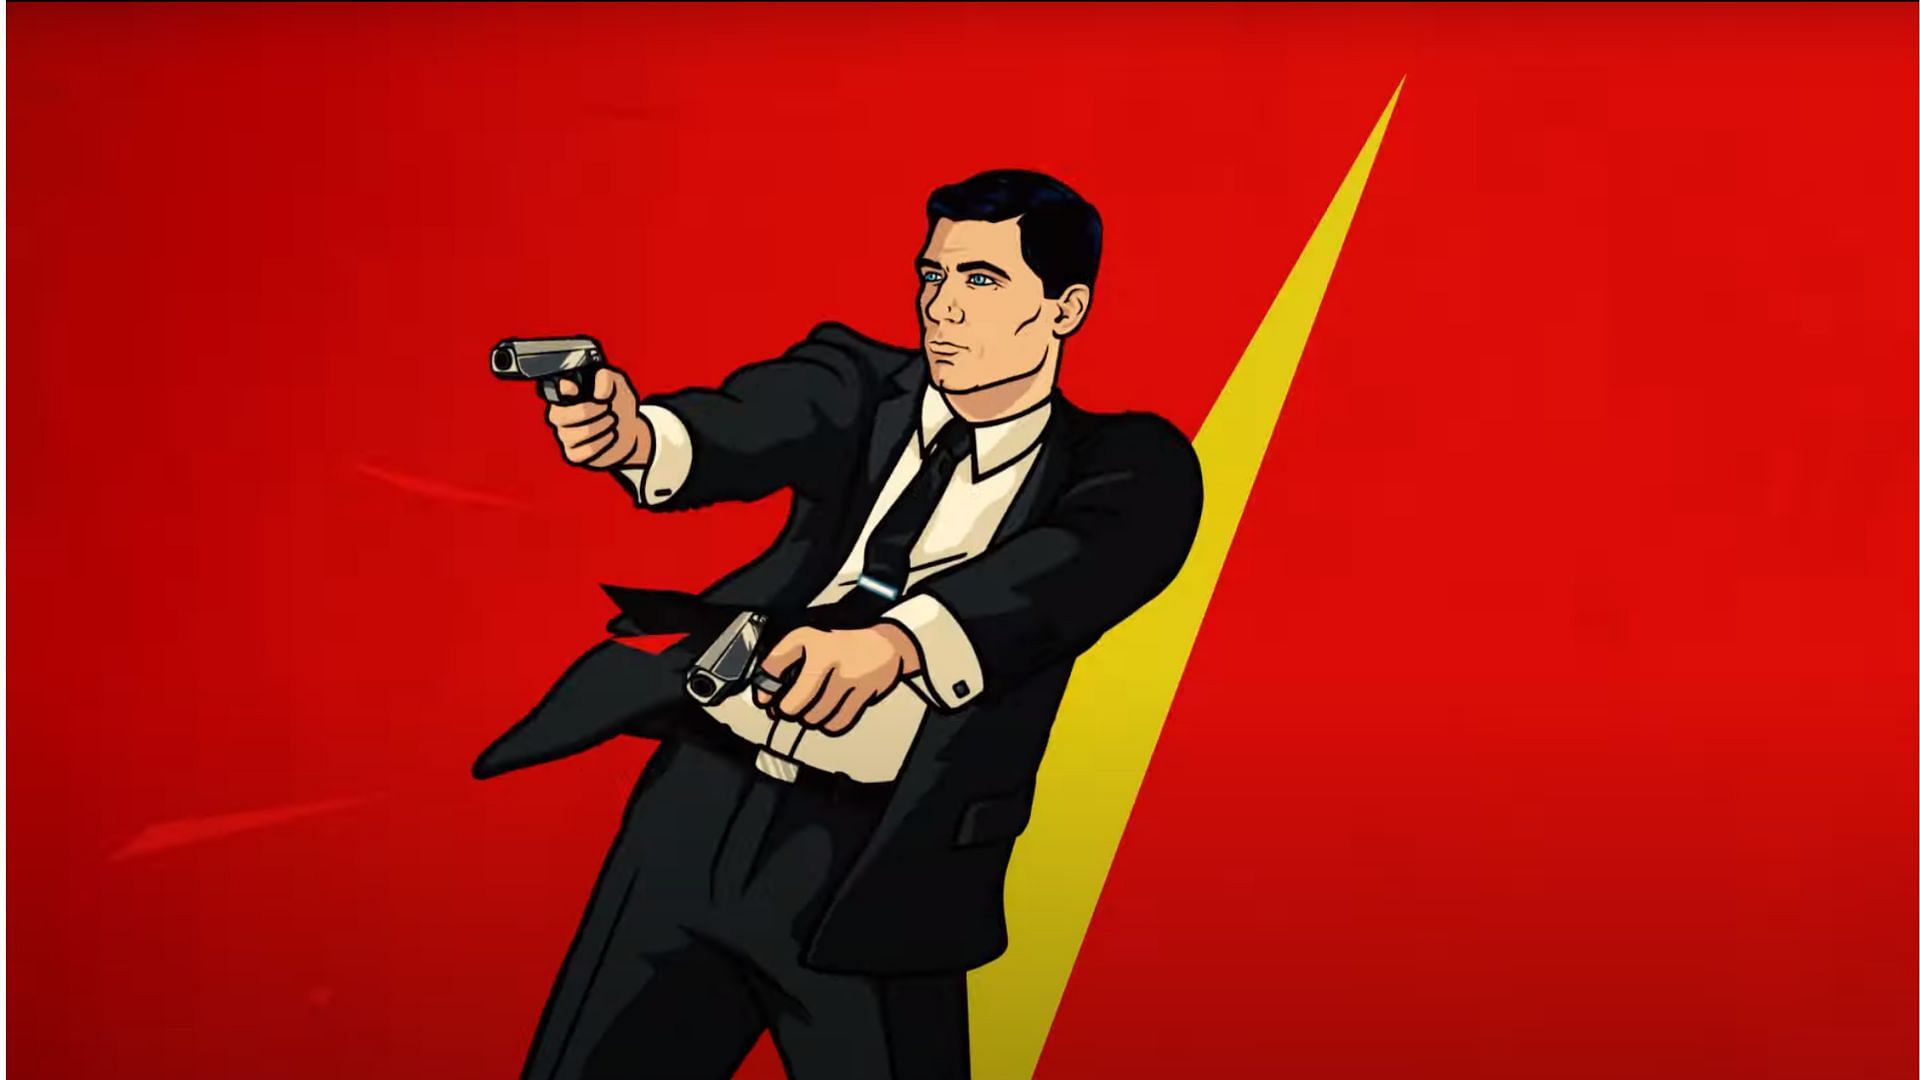 Sterling Archer is bidding a goodbye this December (Image via FX Networks)